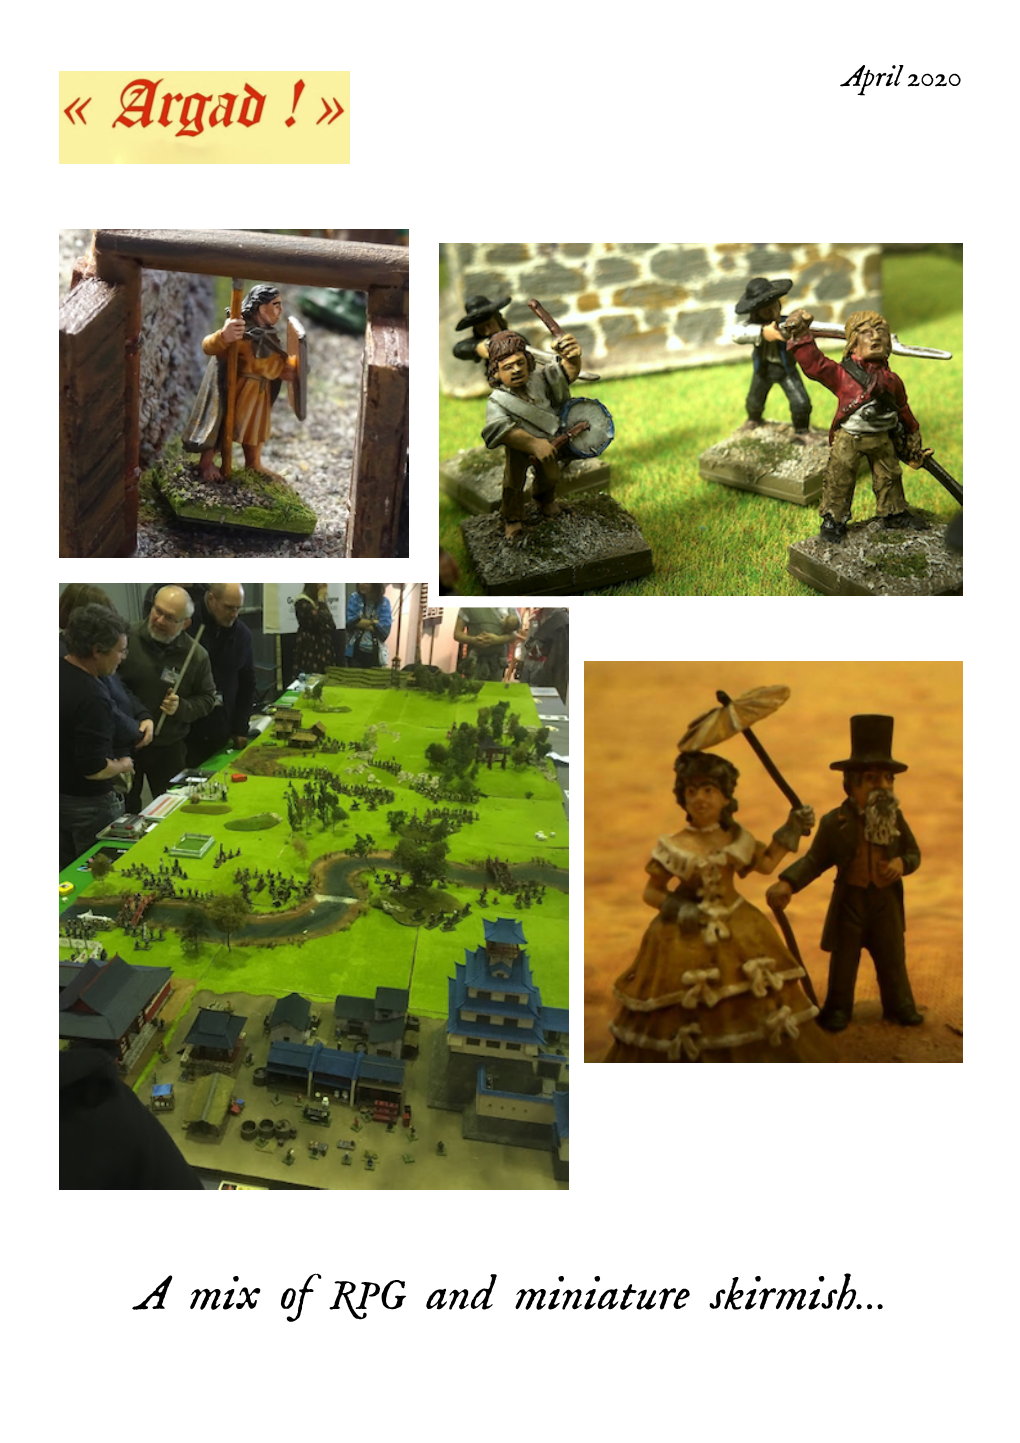 A Mix of RPG and Miniature Skirmish... « Argad ! » Is a Mix of Role-Playing and 28Mm Skirmish Rules